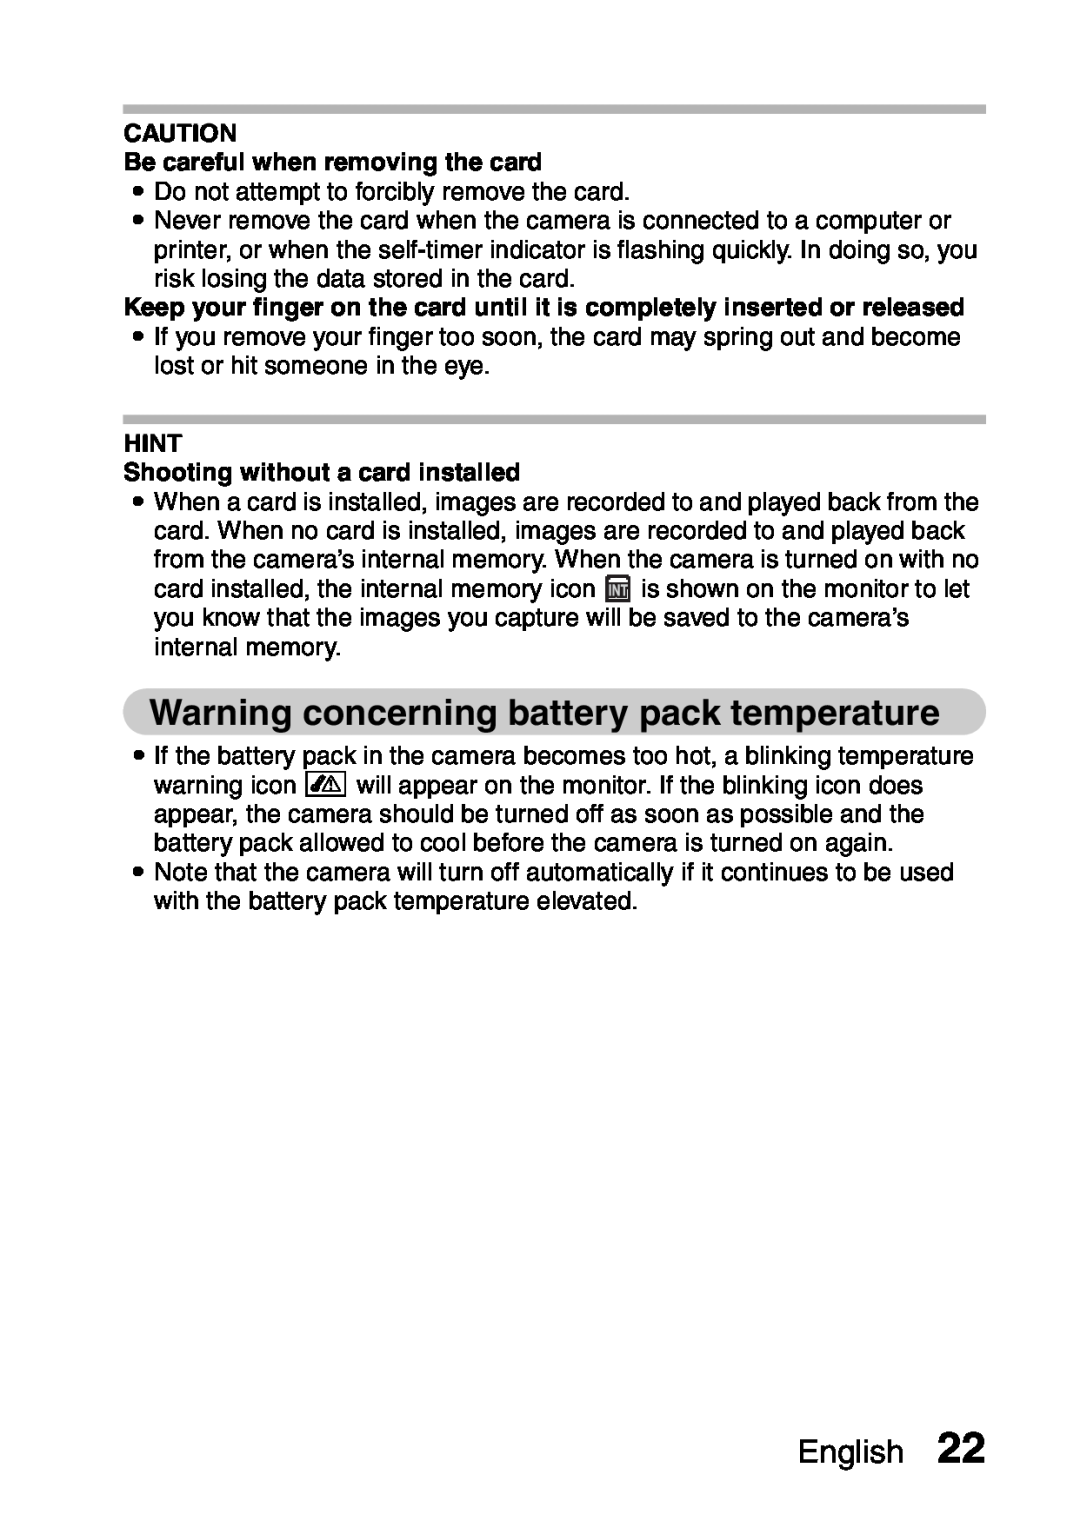 Samsung R50 instruction manual Warning concerning battery pack temperature, English, Be careful when removing the card 